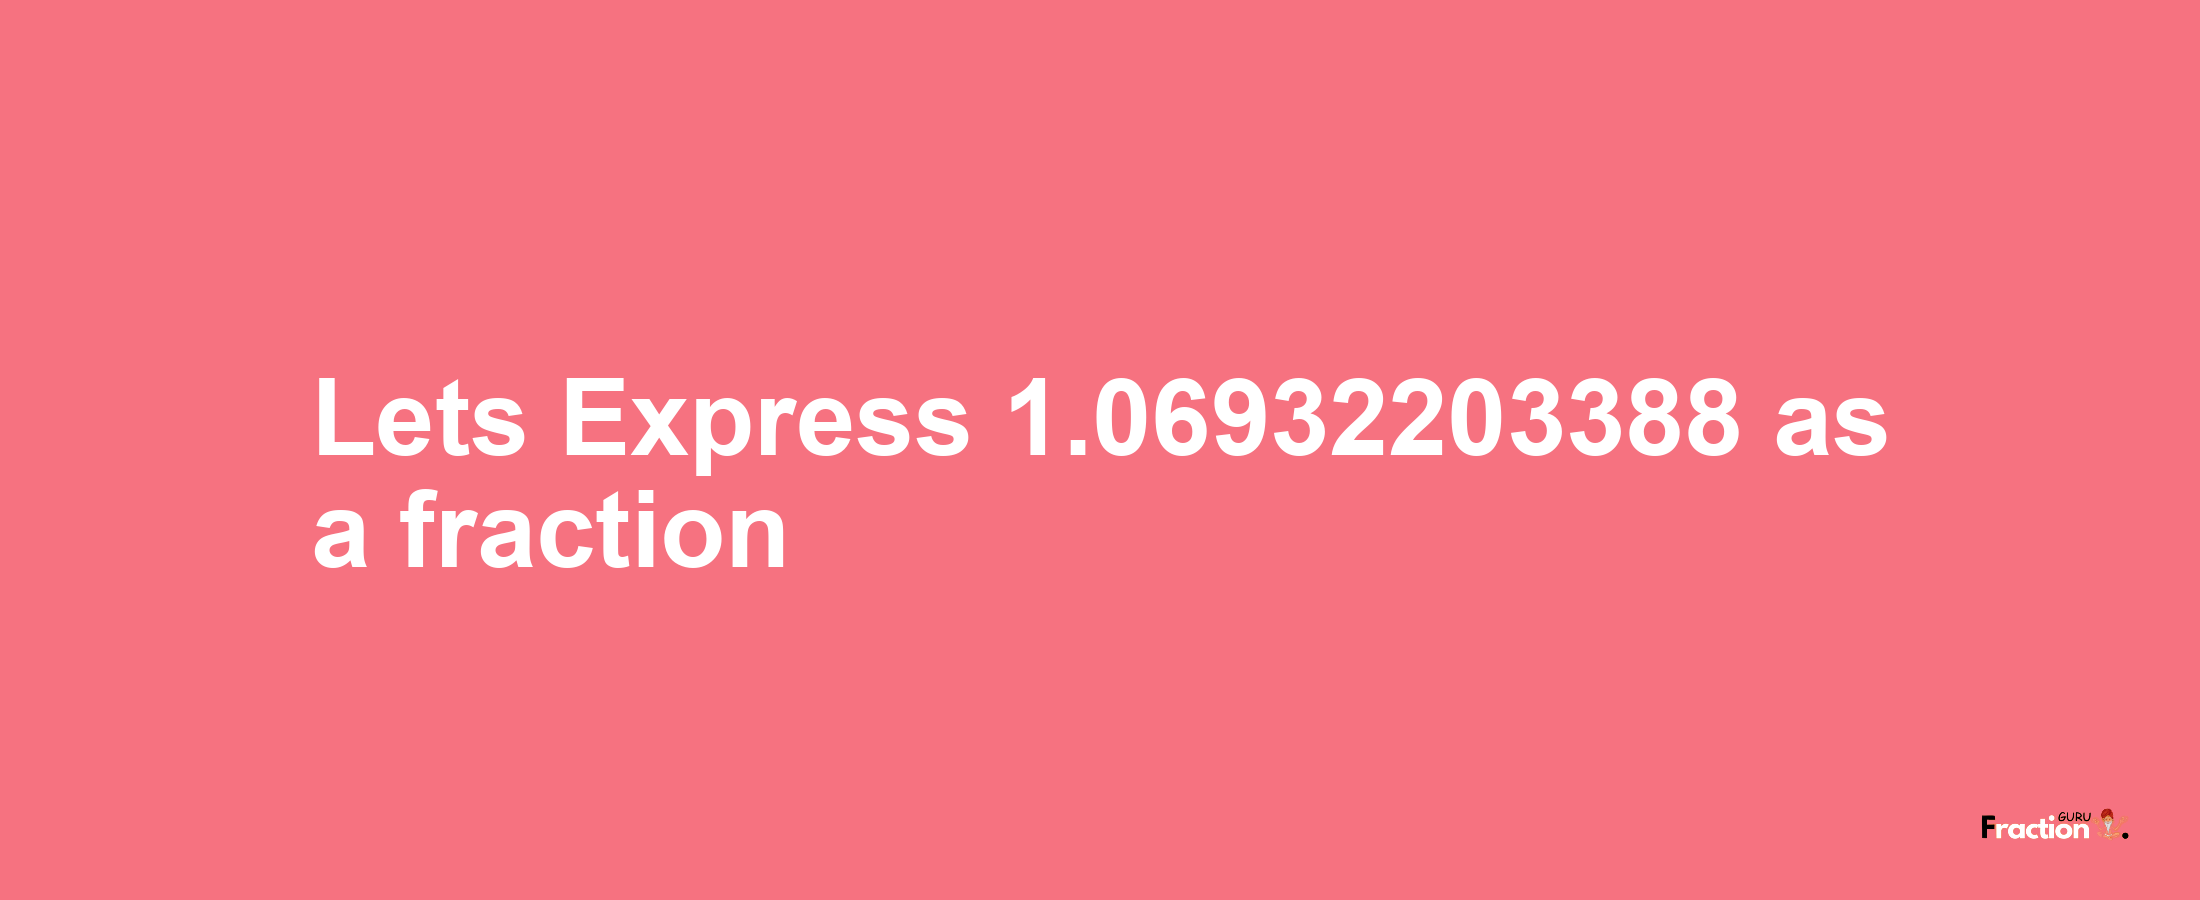 Lets Express 1.06932203388 as afraction